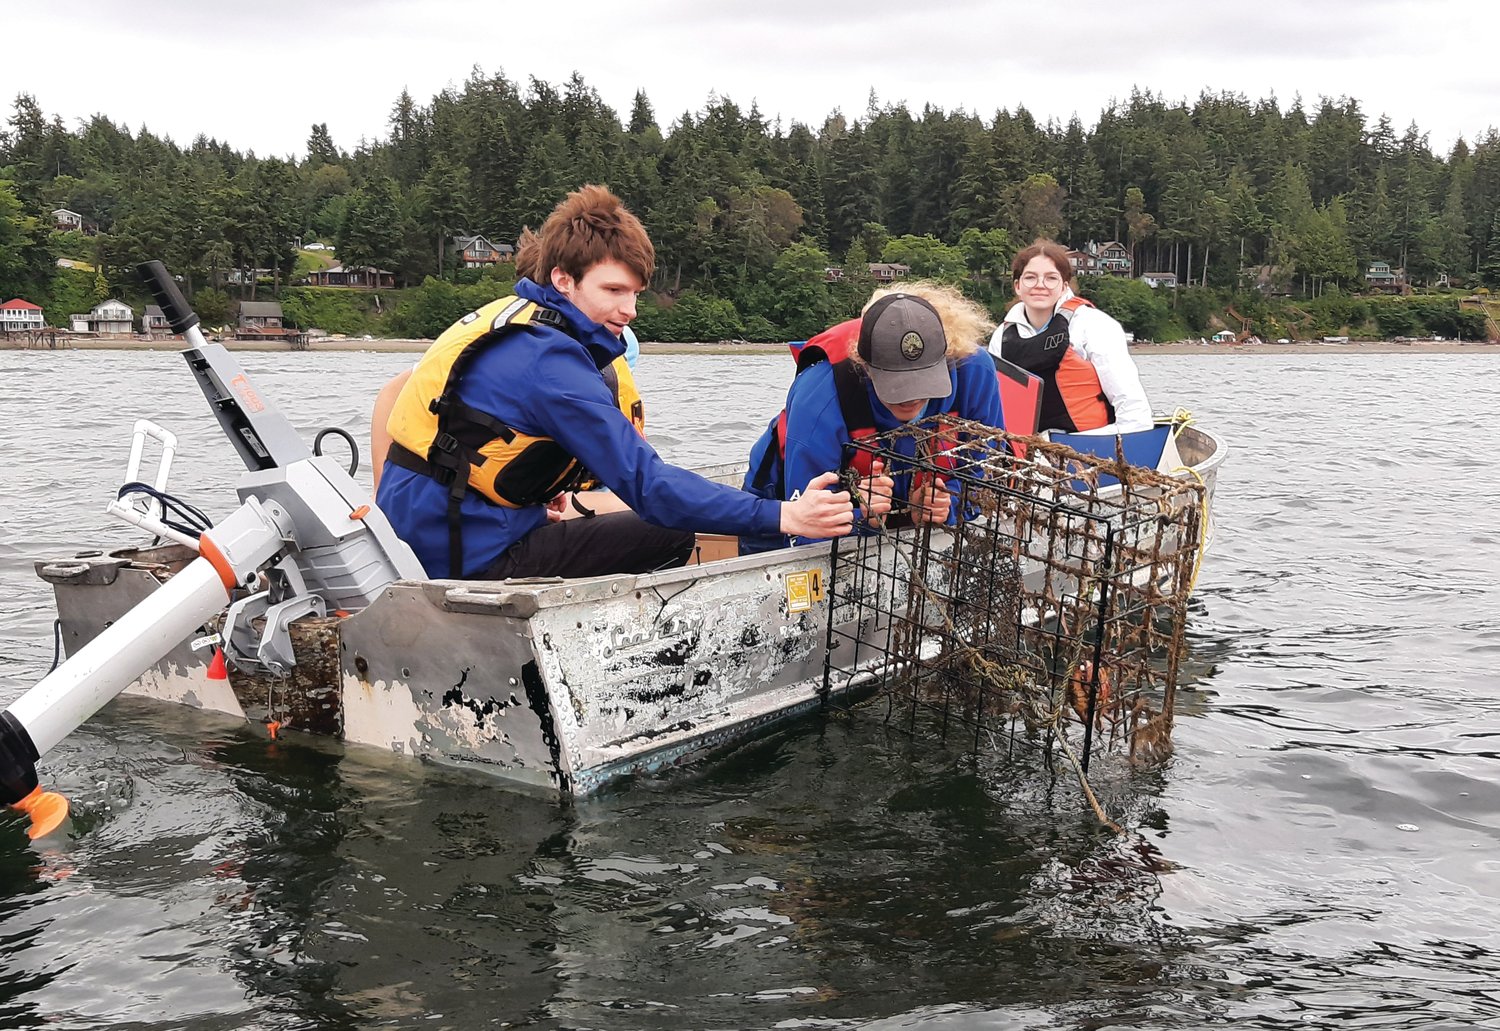 Logan Flanagan and Ella Ashford retrieve a crab pot from the ocean. The team uses GPS data to track down suspected locations of derelict crab traps, or “ghost pots,” around the waters of Port Townsend, then use their ROV to find and recover the traps.